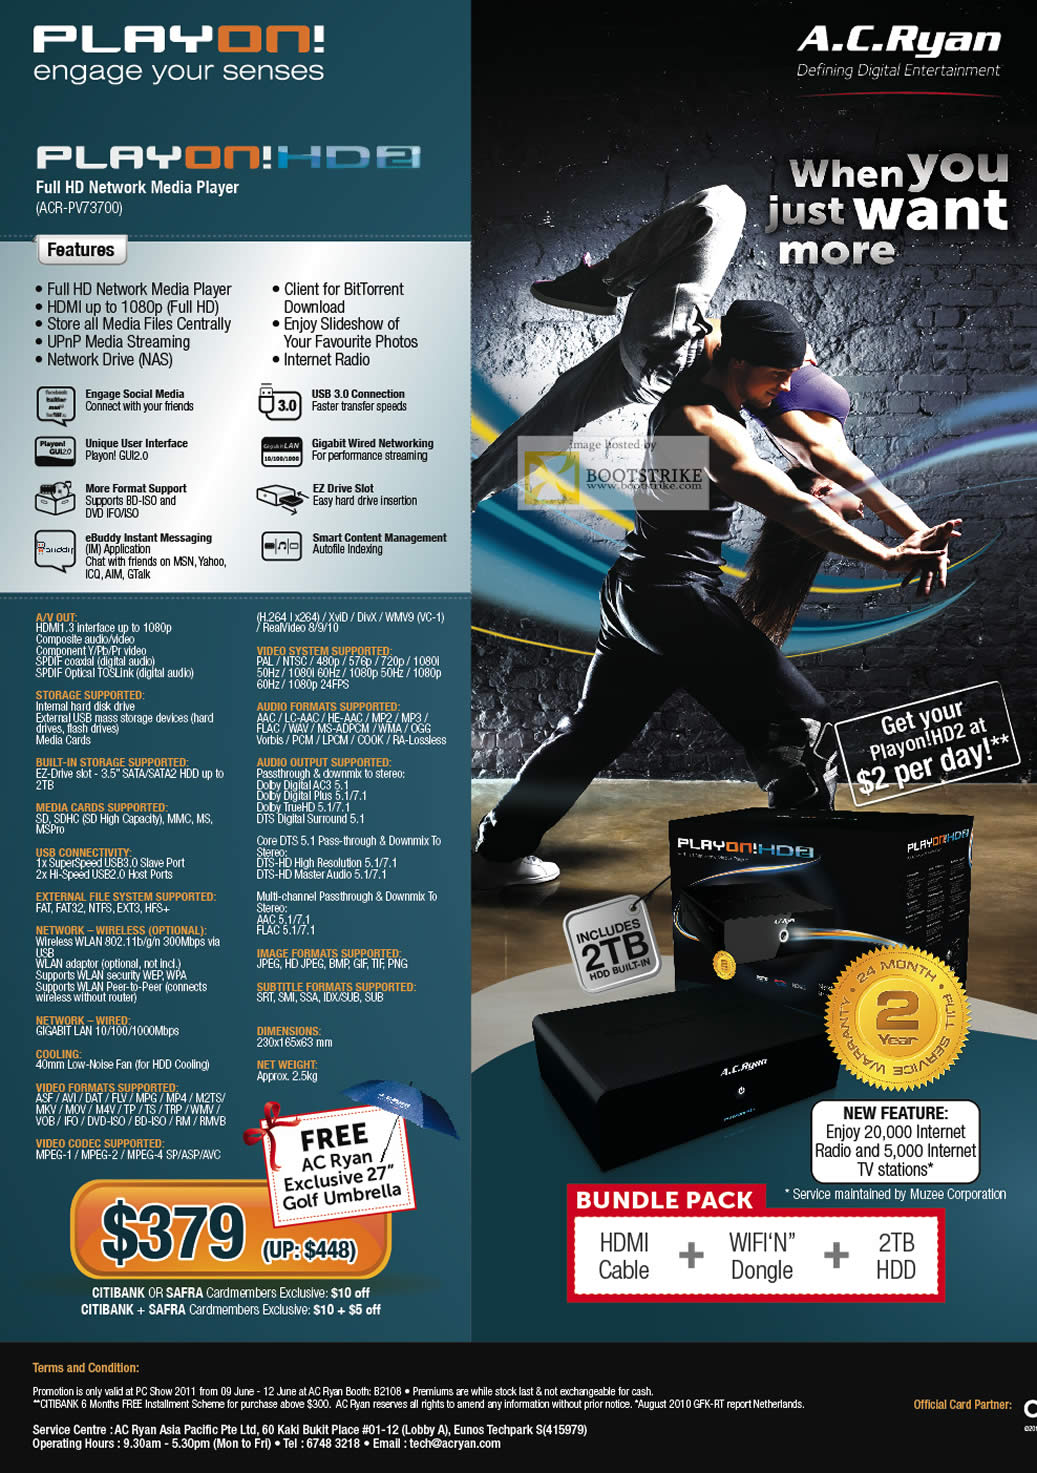 PC Show 2011 price list image brochure of A.C. Ryan Play On! HD2 ACR-PV73700 Media Player